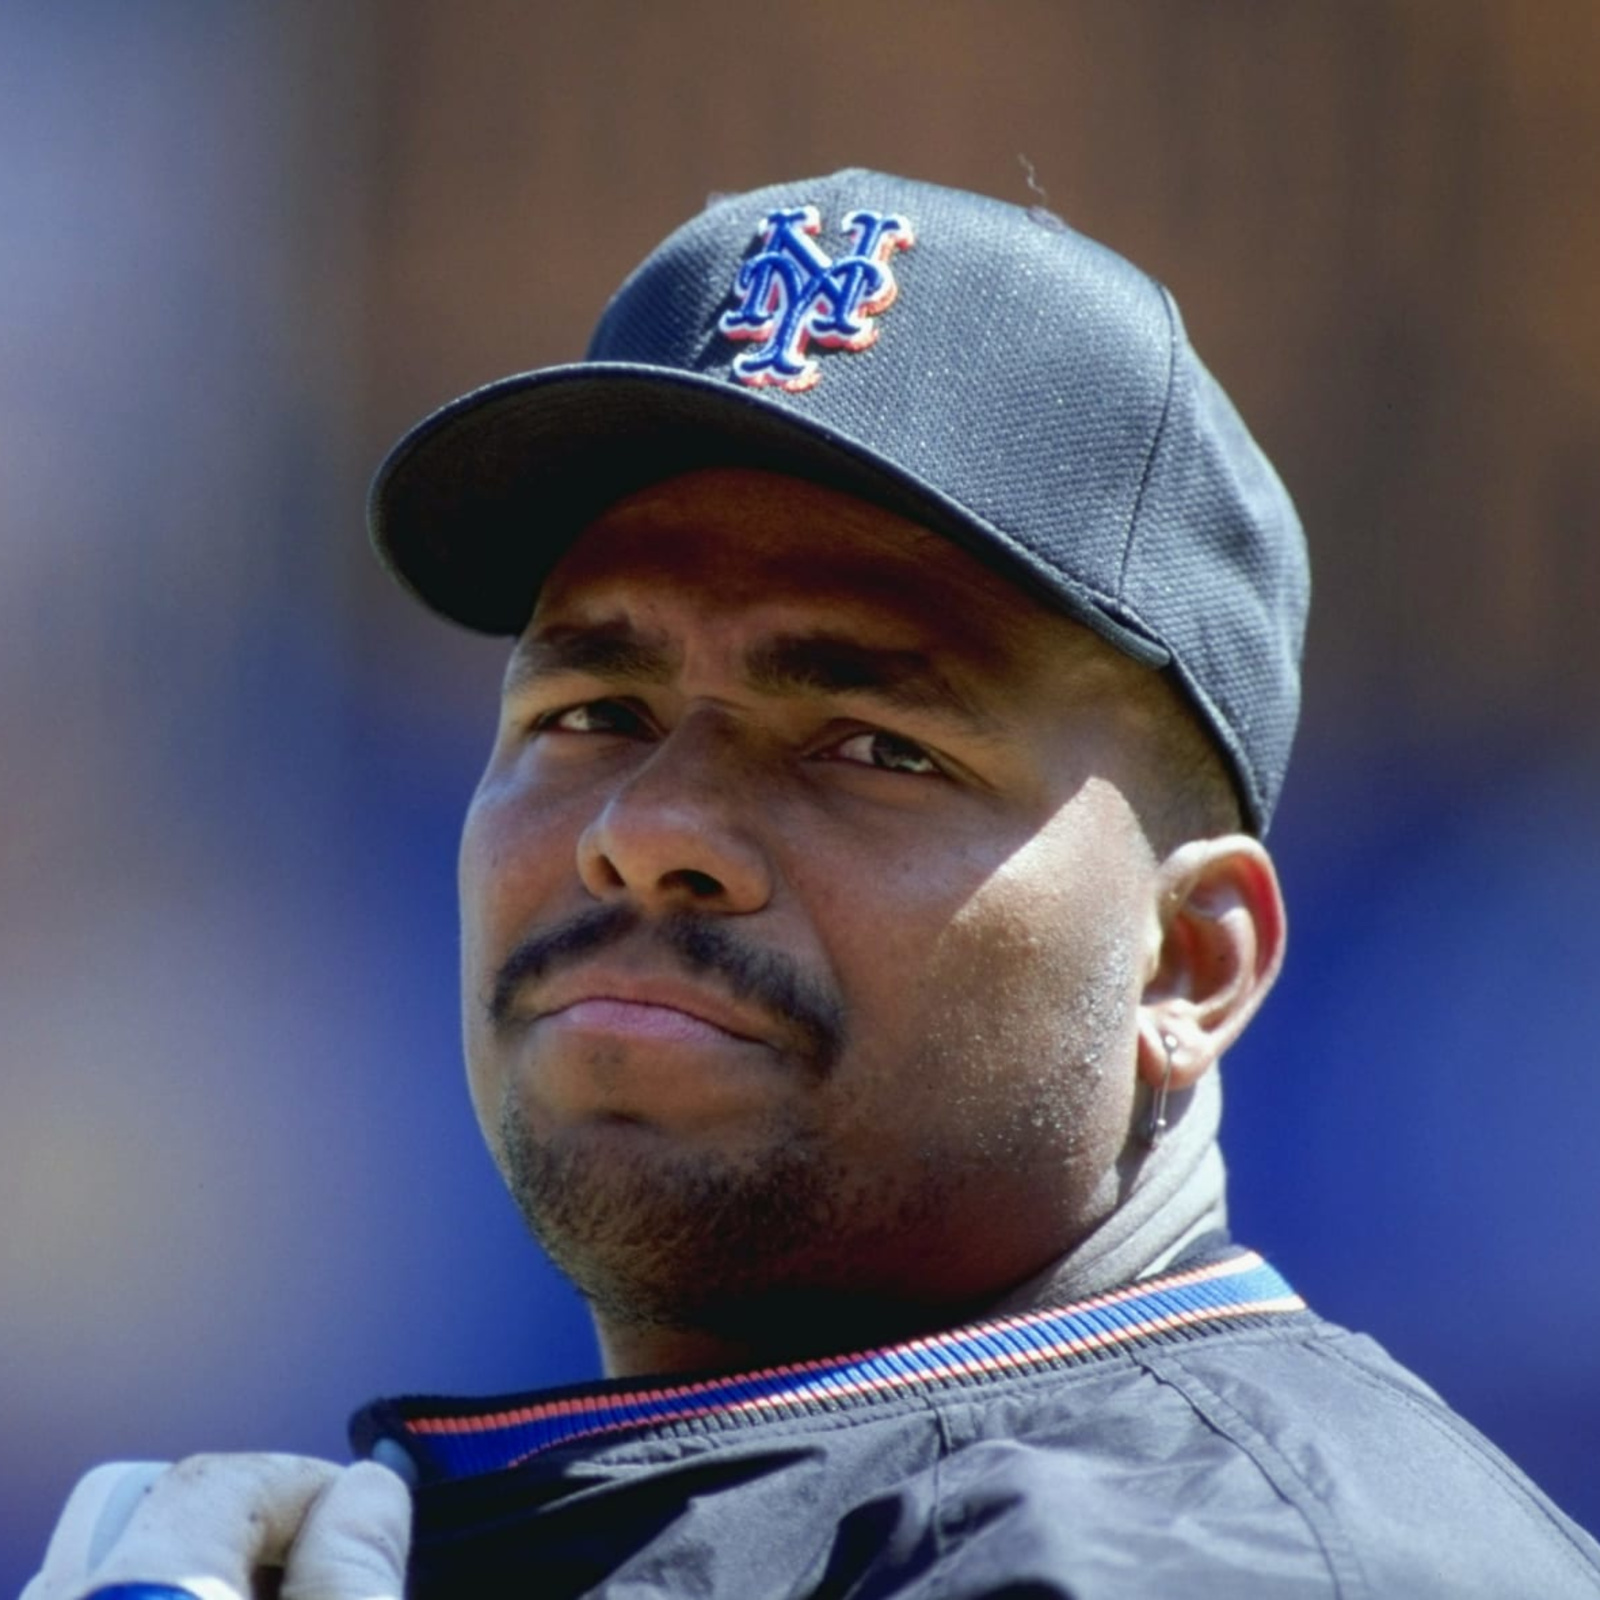 Bobby Bonilla's Infamous Mets Contract Sold at Auction - Sports Illustrated